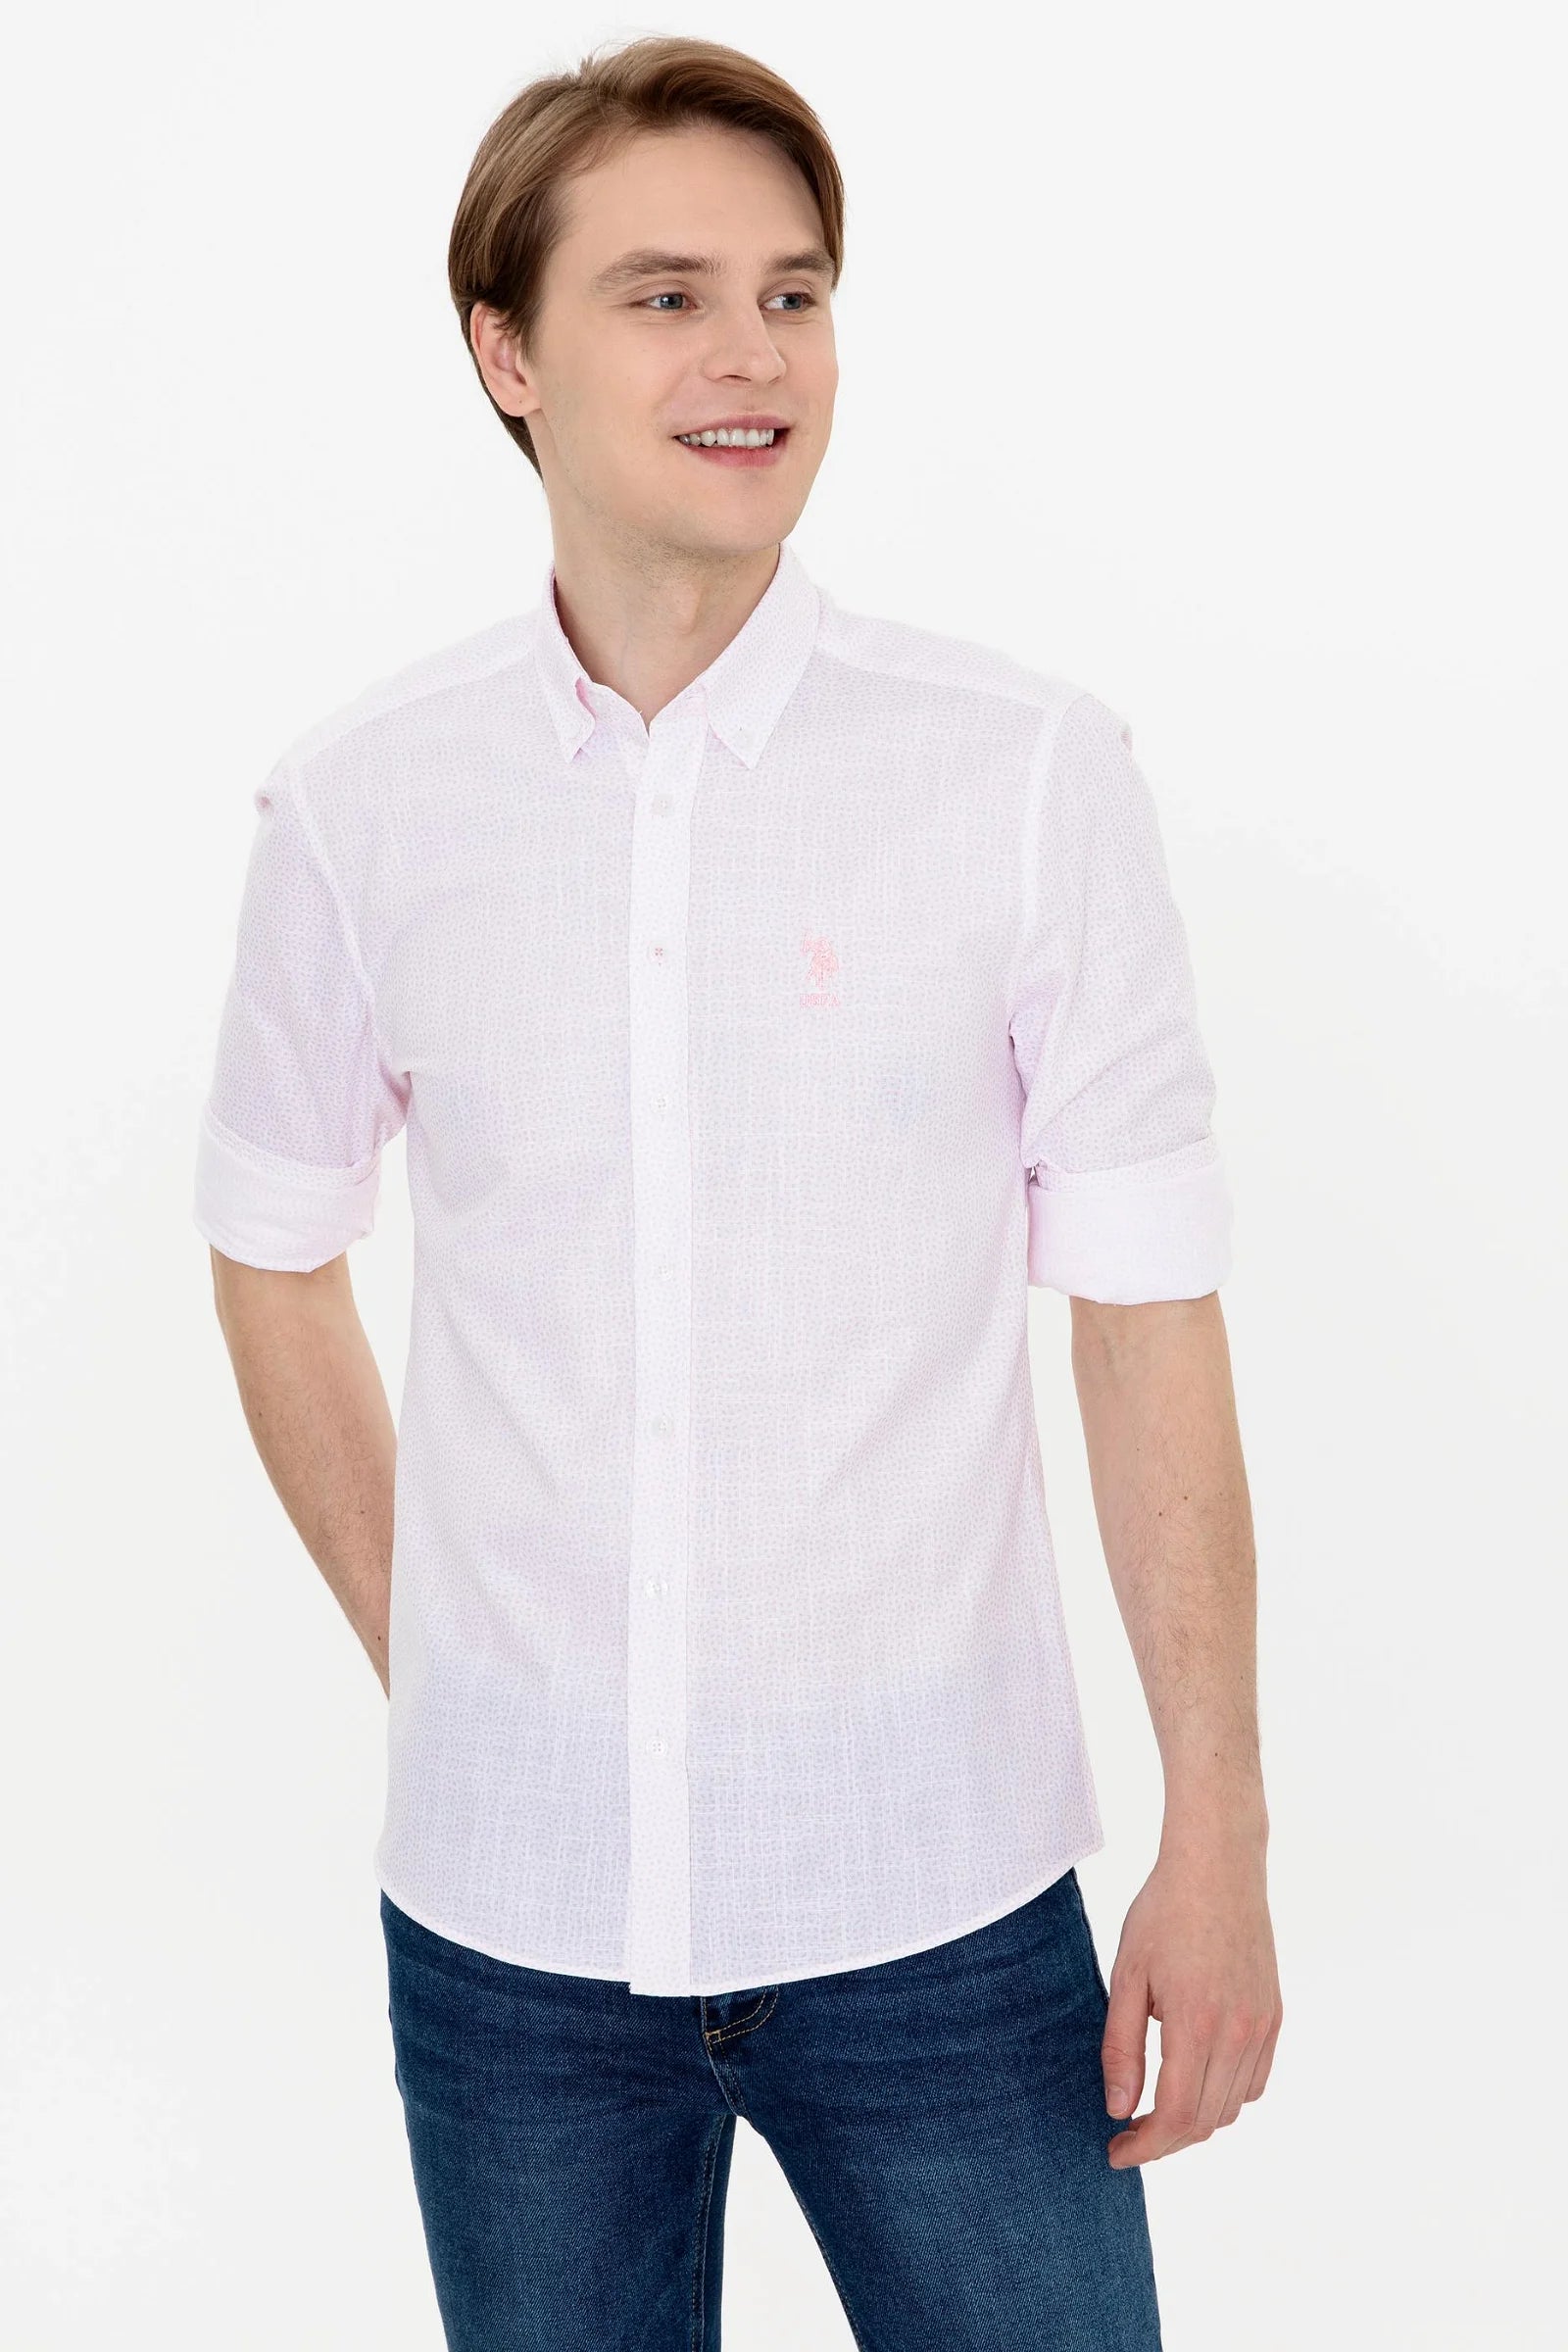 US Polo Assn. Printed Dotted Pattern Shirt Long Sleeve - Men